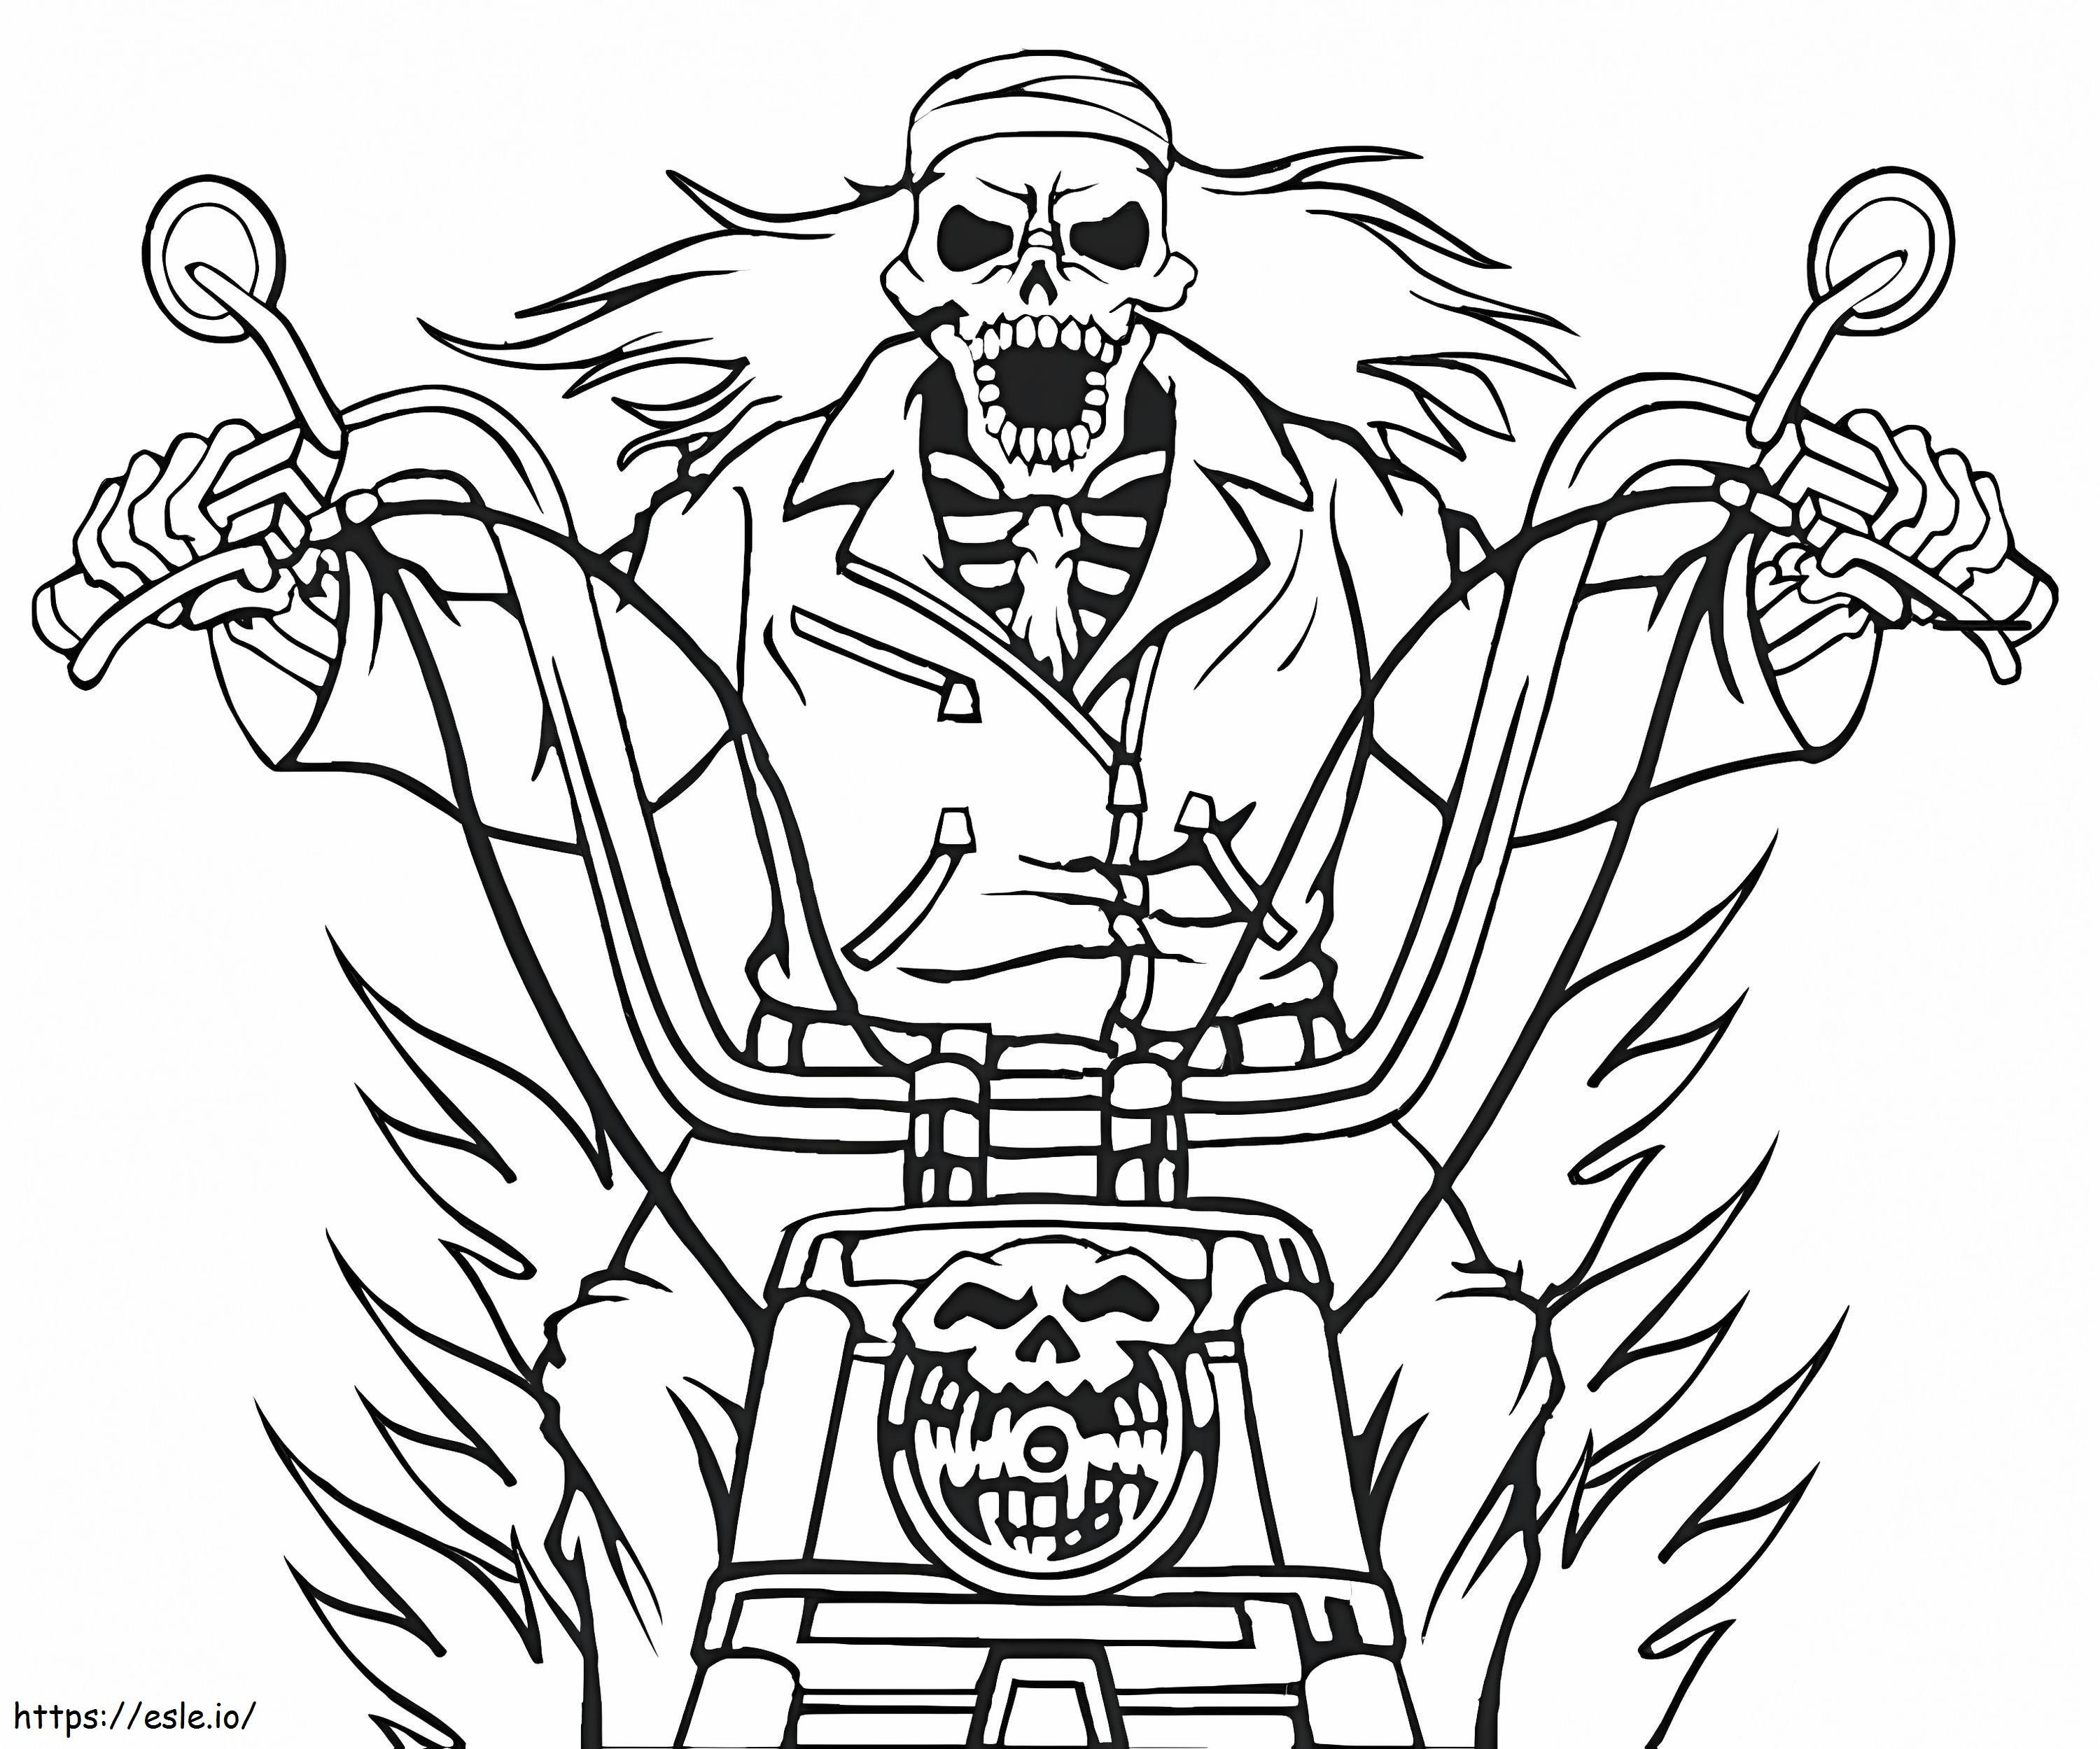 Scary Ghost Rider coloring page